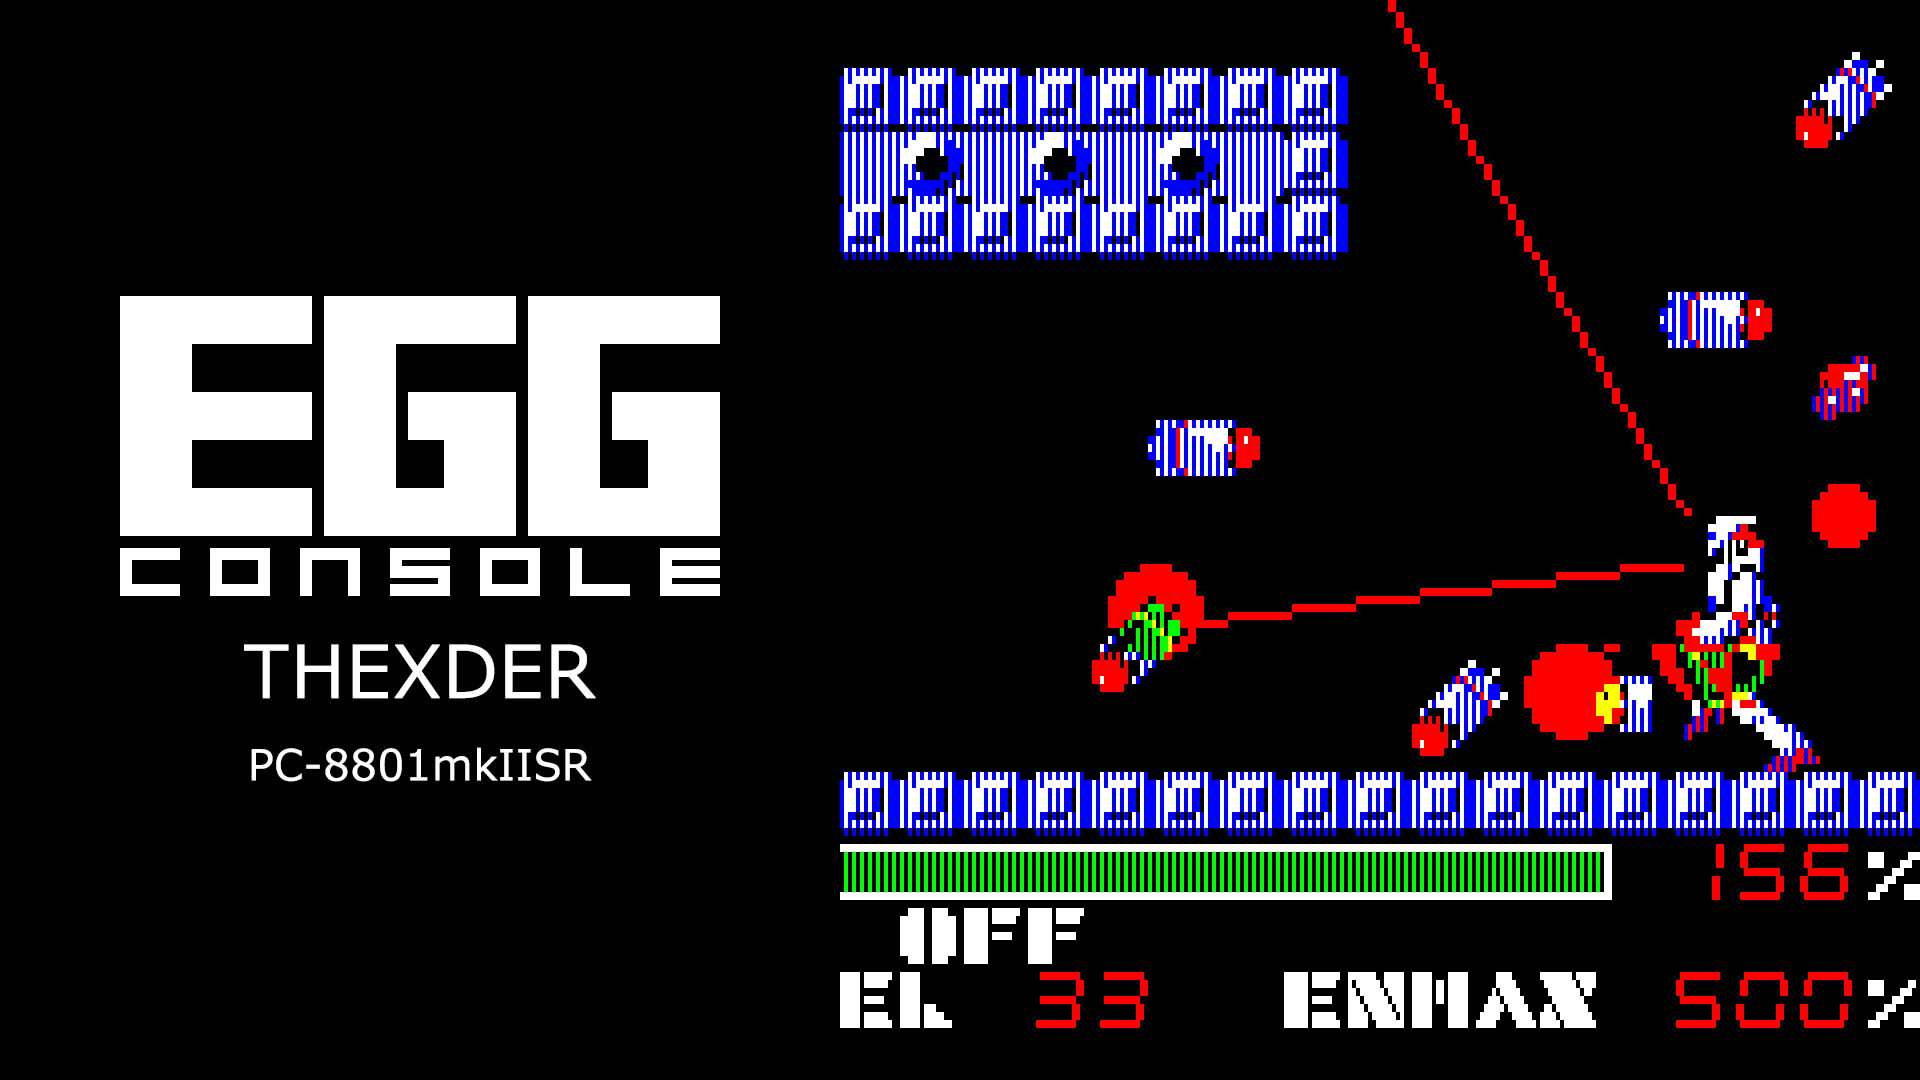 EGGCONSOLE THEXDER PC-8801mkIISR